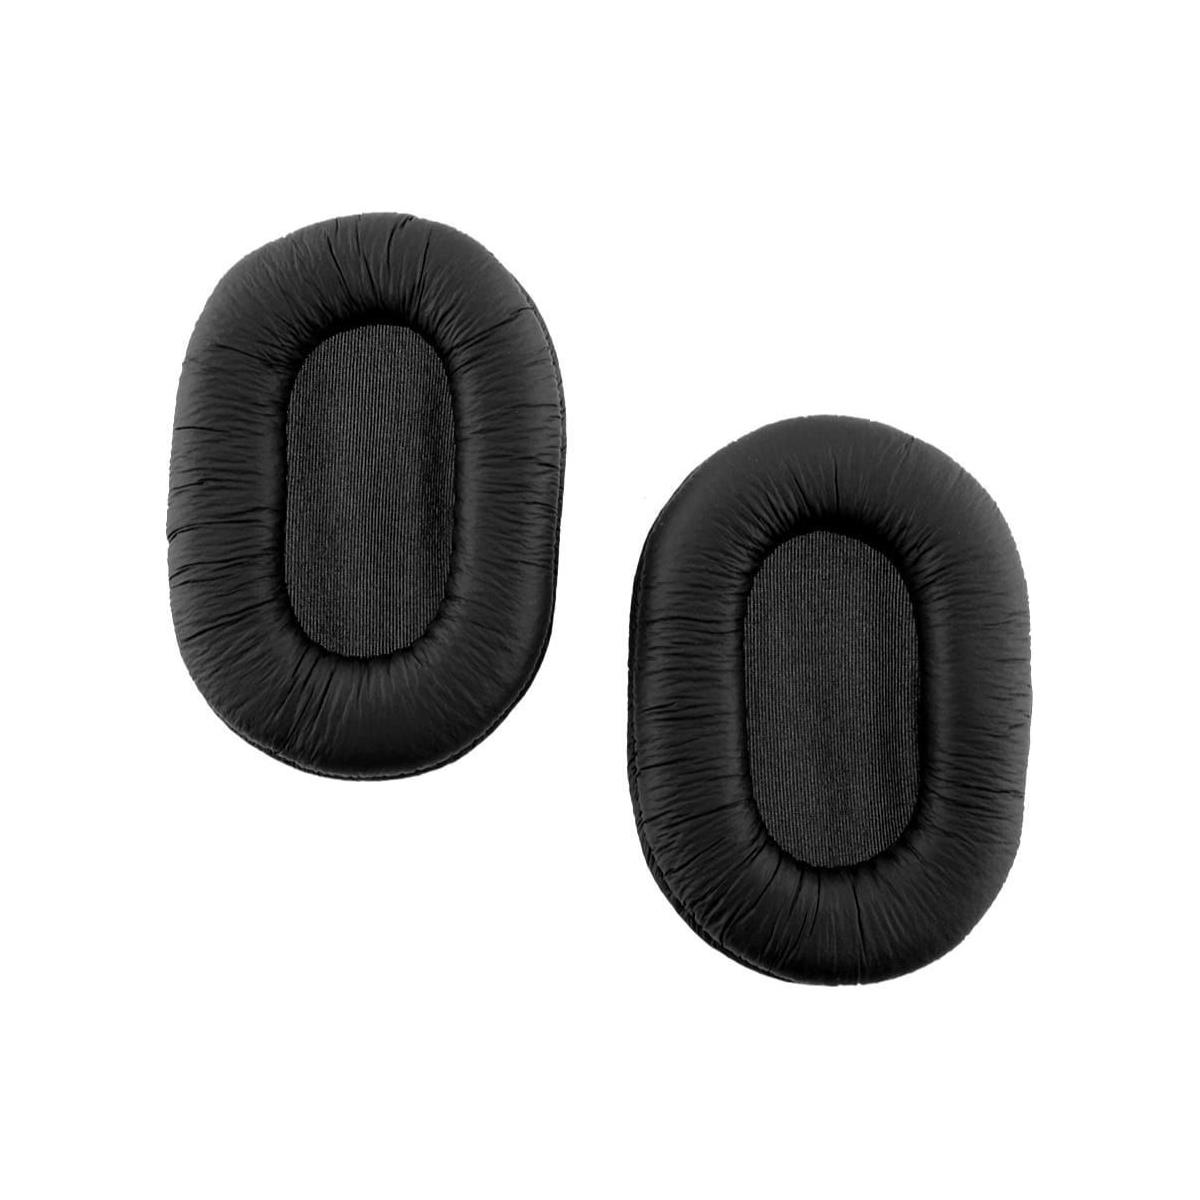 Remote Audio Ear Pads for Sony MDR-7506 Headphones, Pair -  SONY7506EP